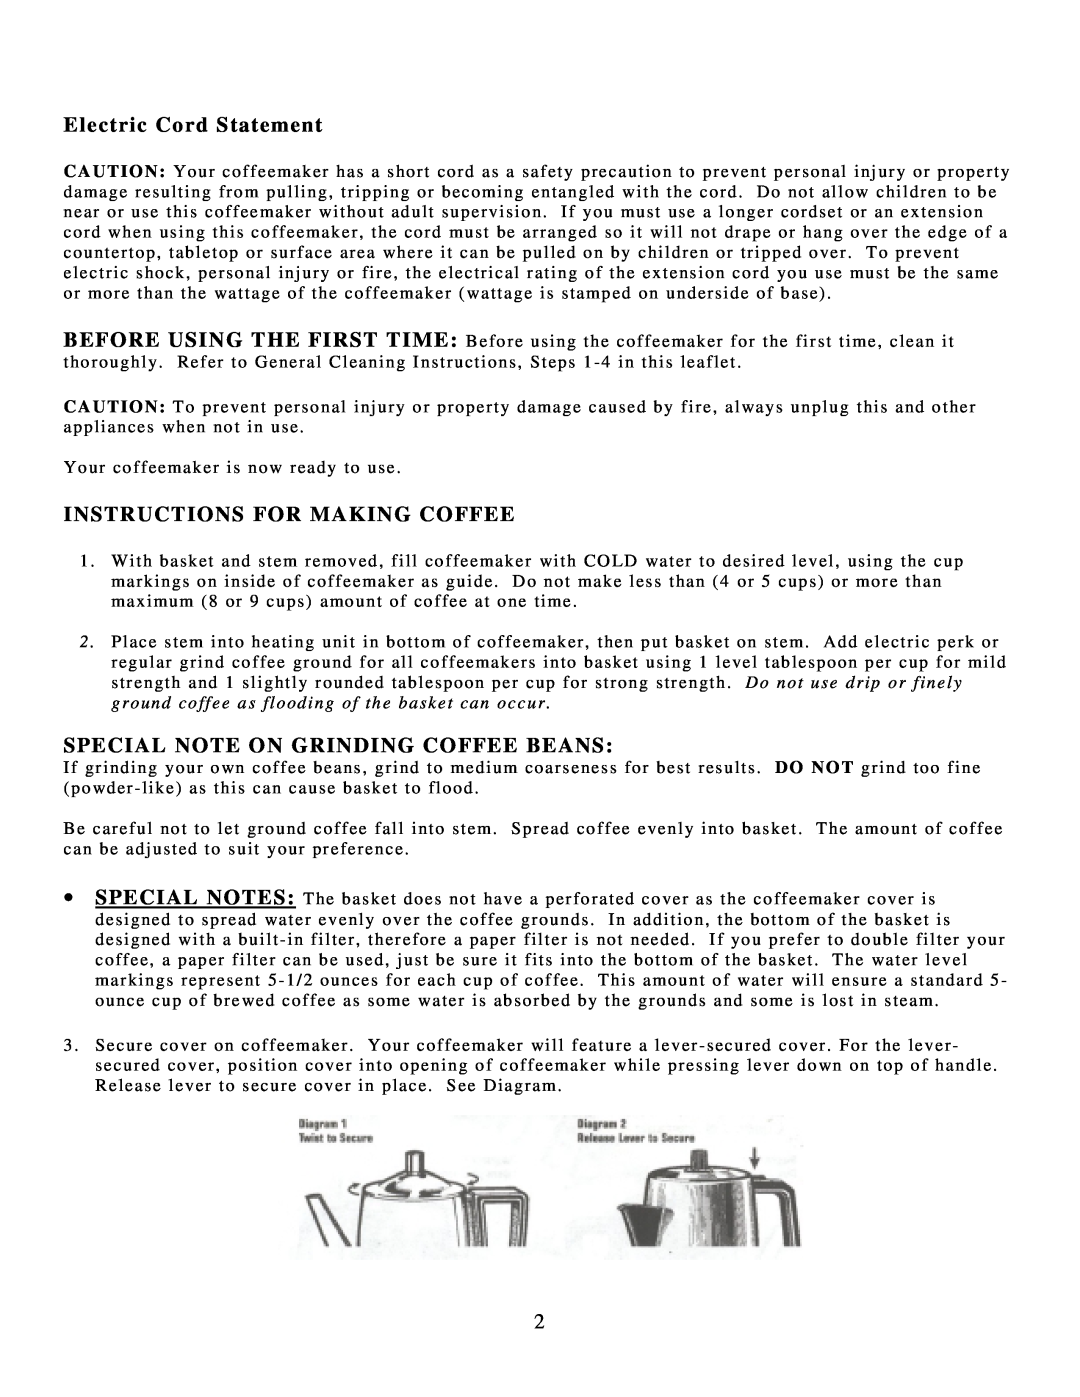 West Bend 54129 manual Electric Cord Statement, Instructions For Making Coffee, Special Note On Grinding Coffee Beans 